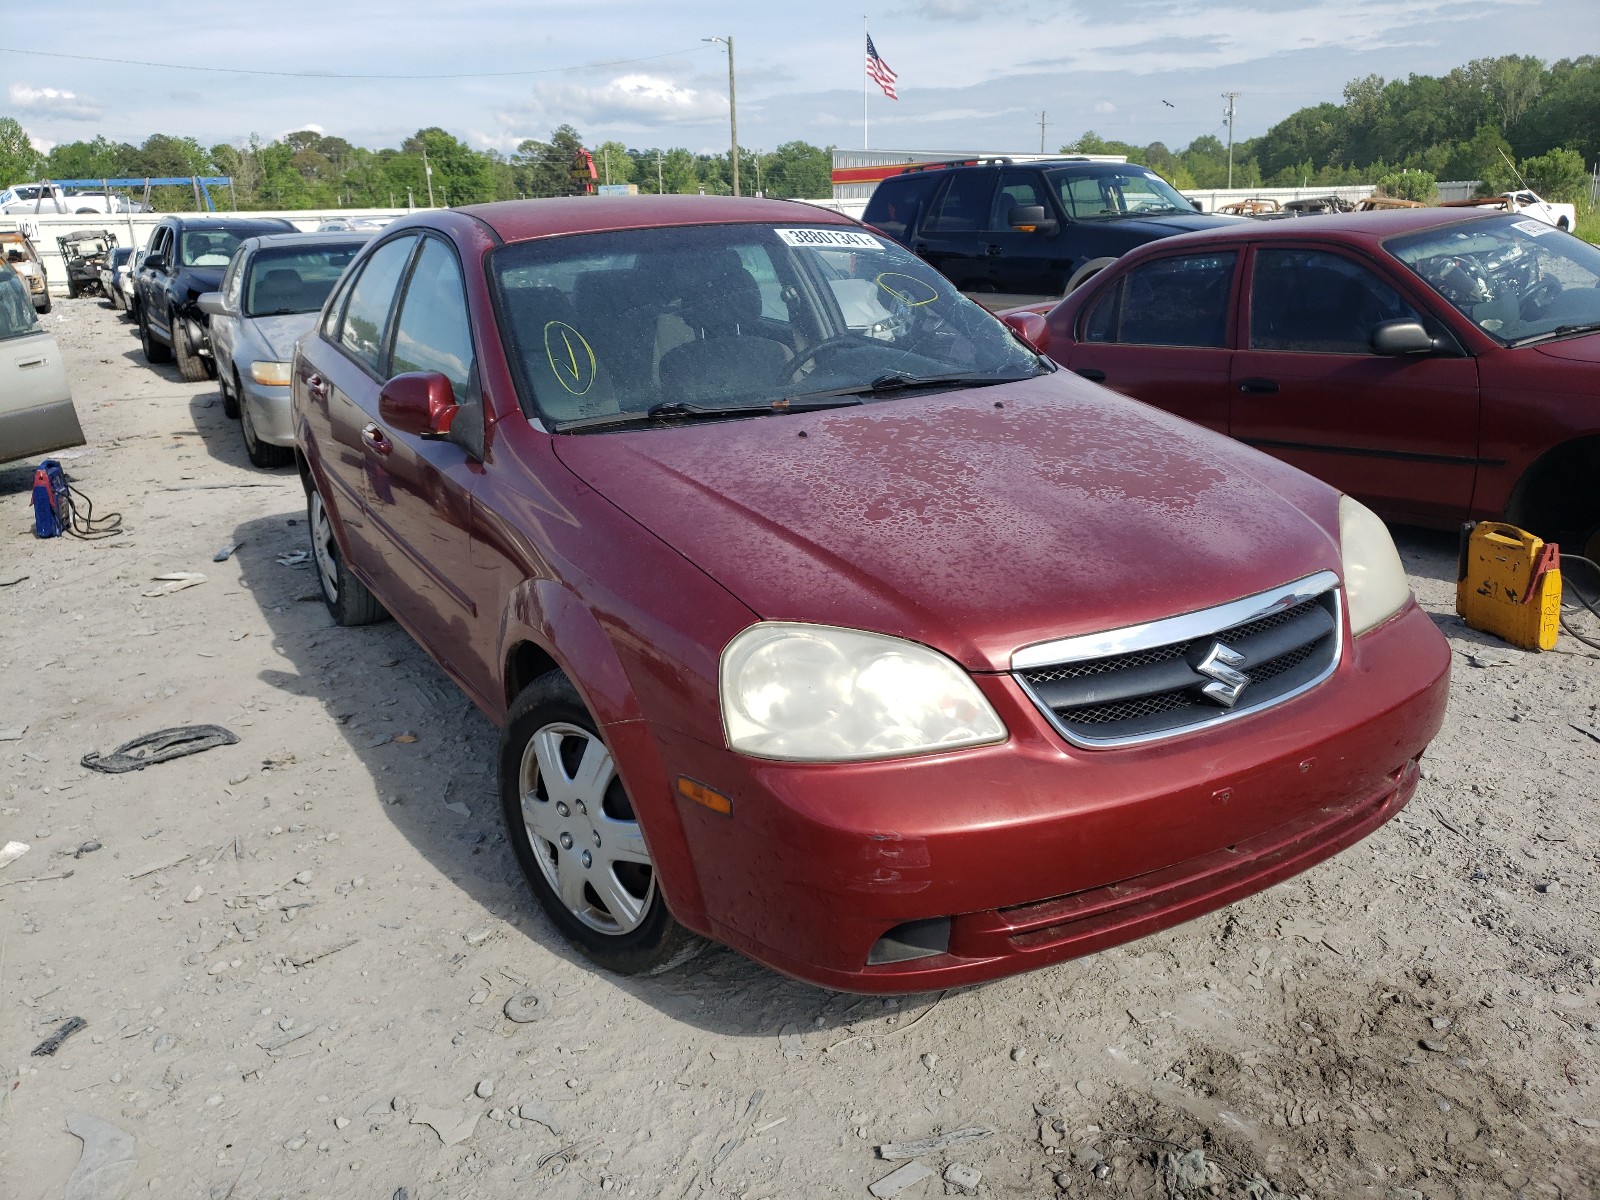 2007 Suzuki Forenza BA for sale at Copart Montgomery, AL Lot #38801*** |  SalvageReseller.com